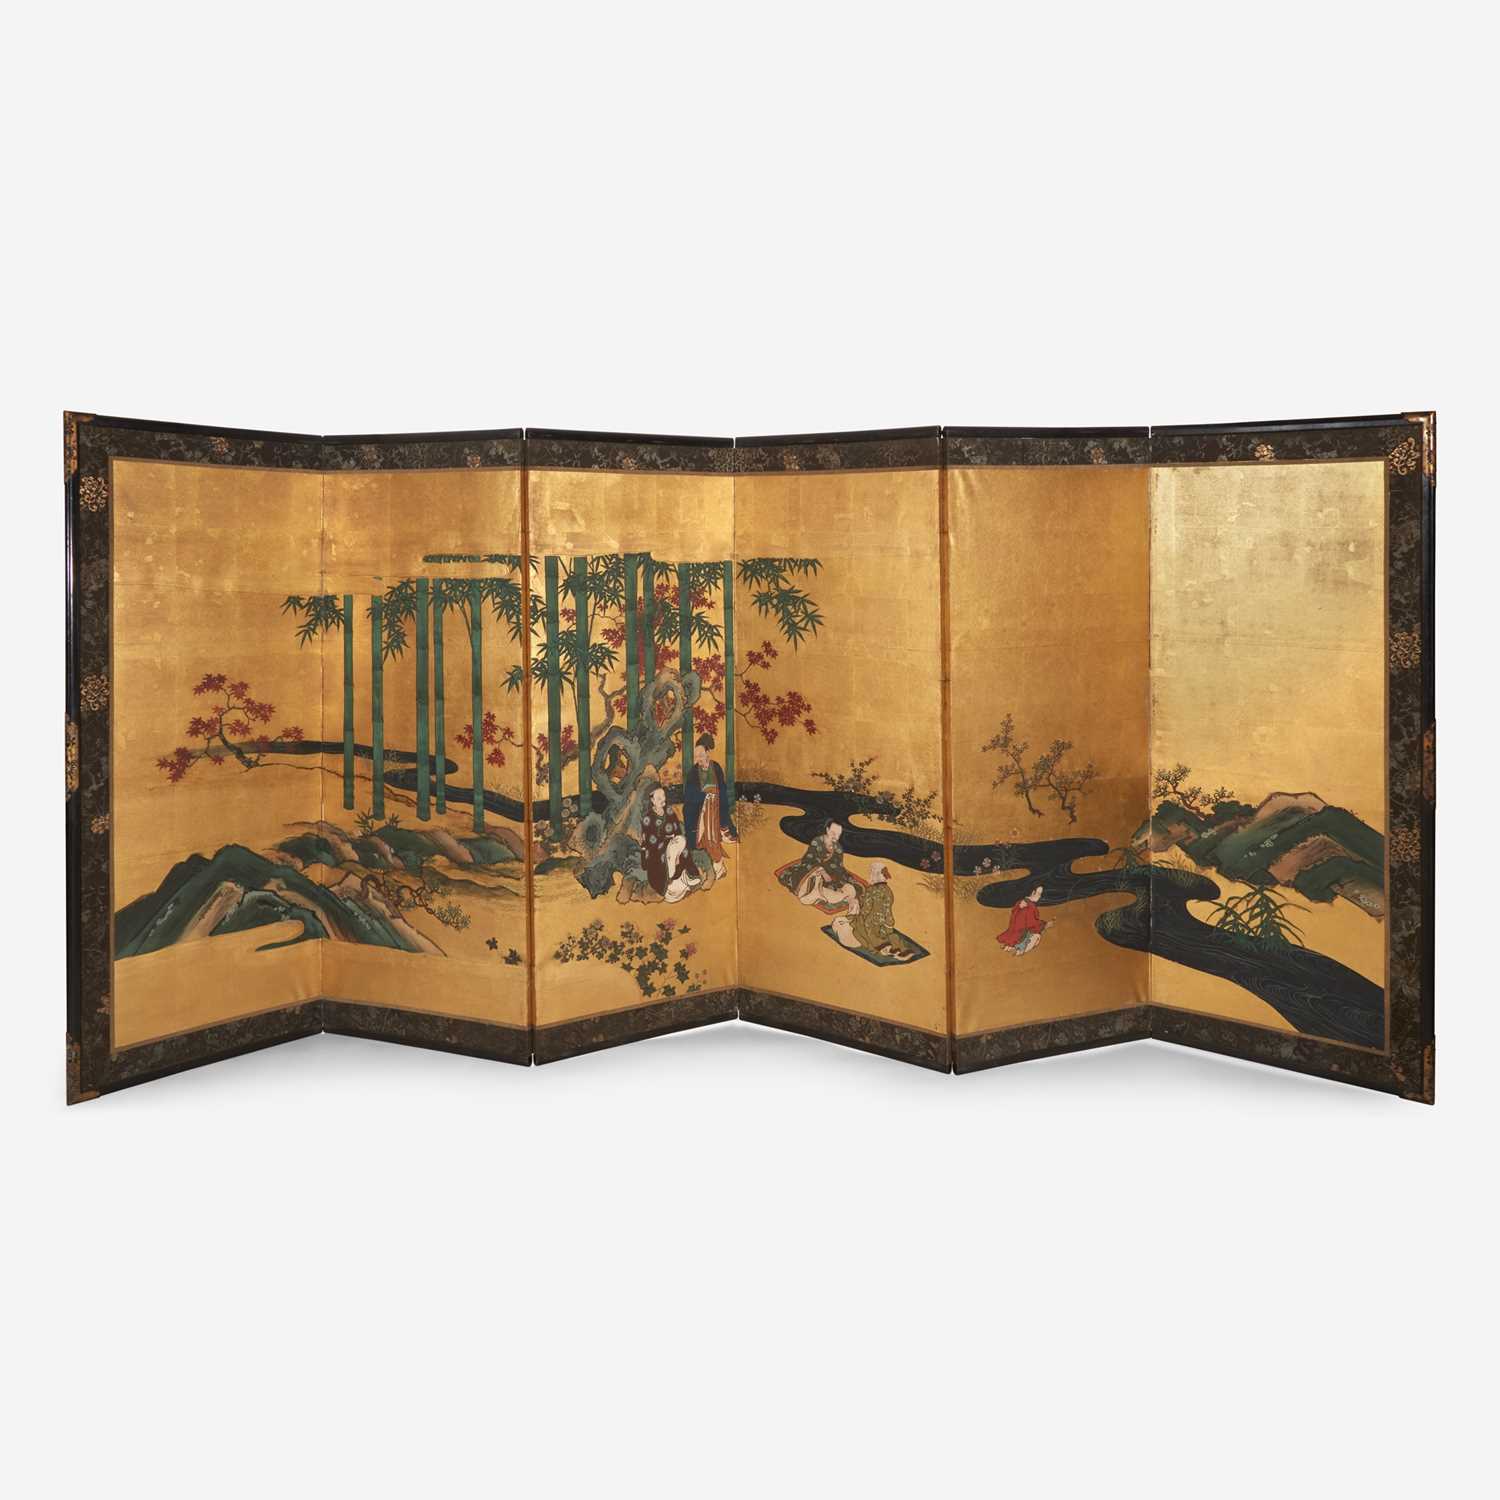 Lot 79 - A pair of Japanese six-panel screens: "The Seven Scholars of the Bamboo Grove"